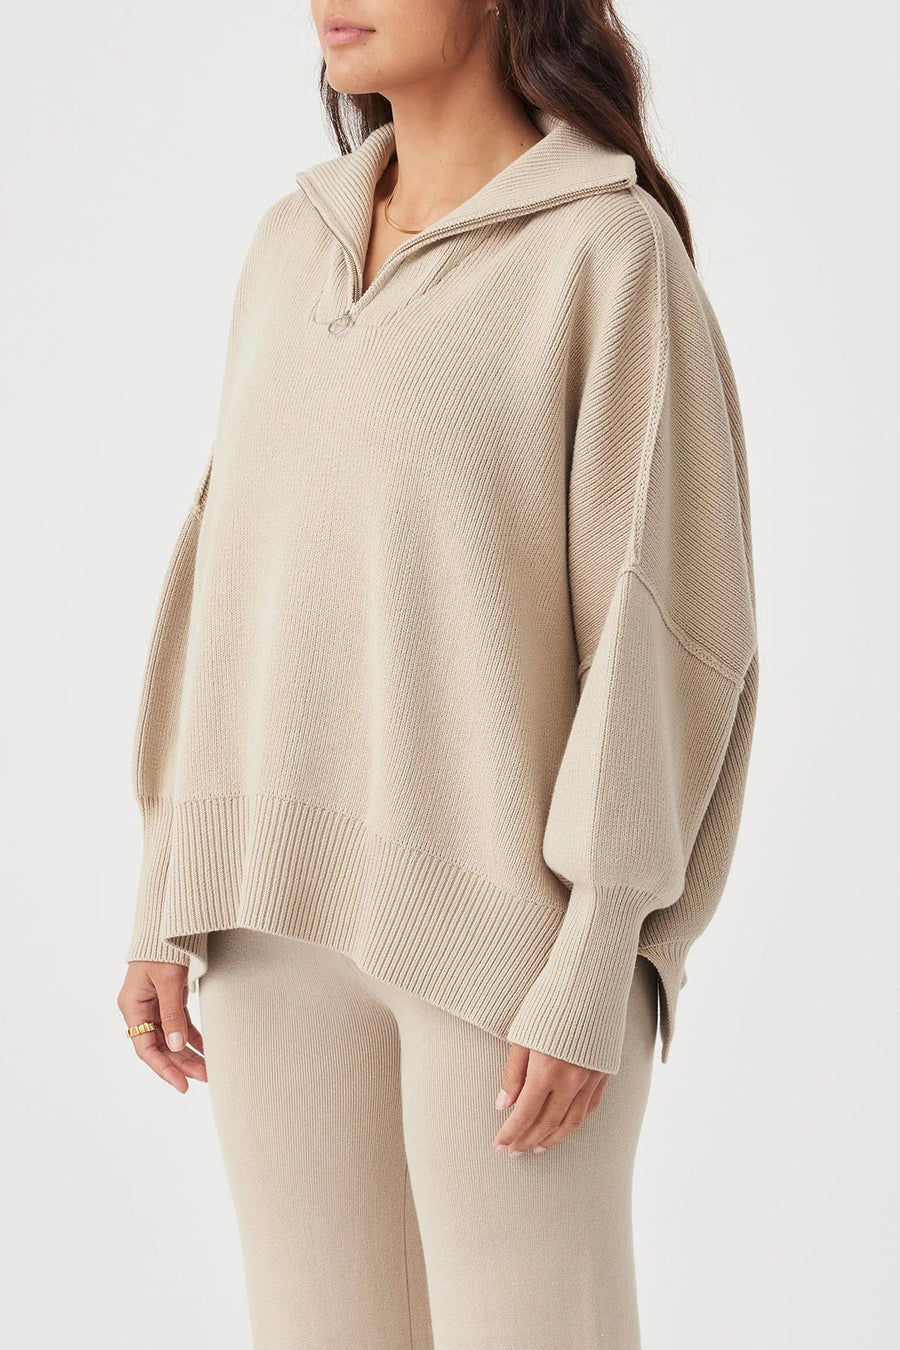 London Sweater Taupe - Kohl and Soda